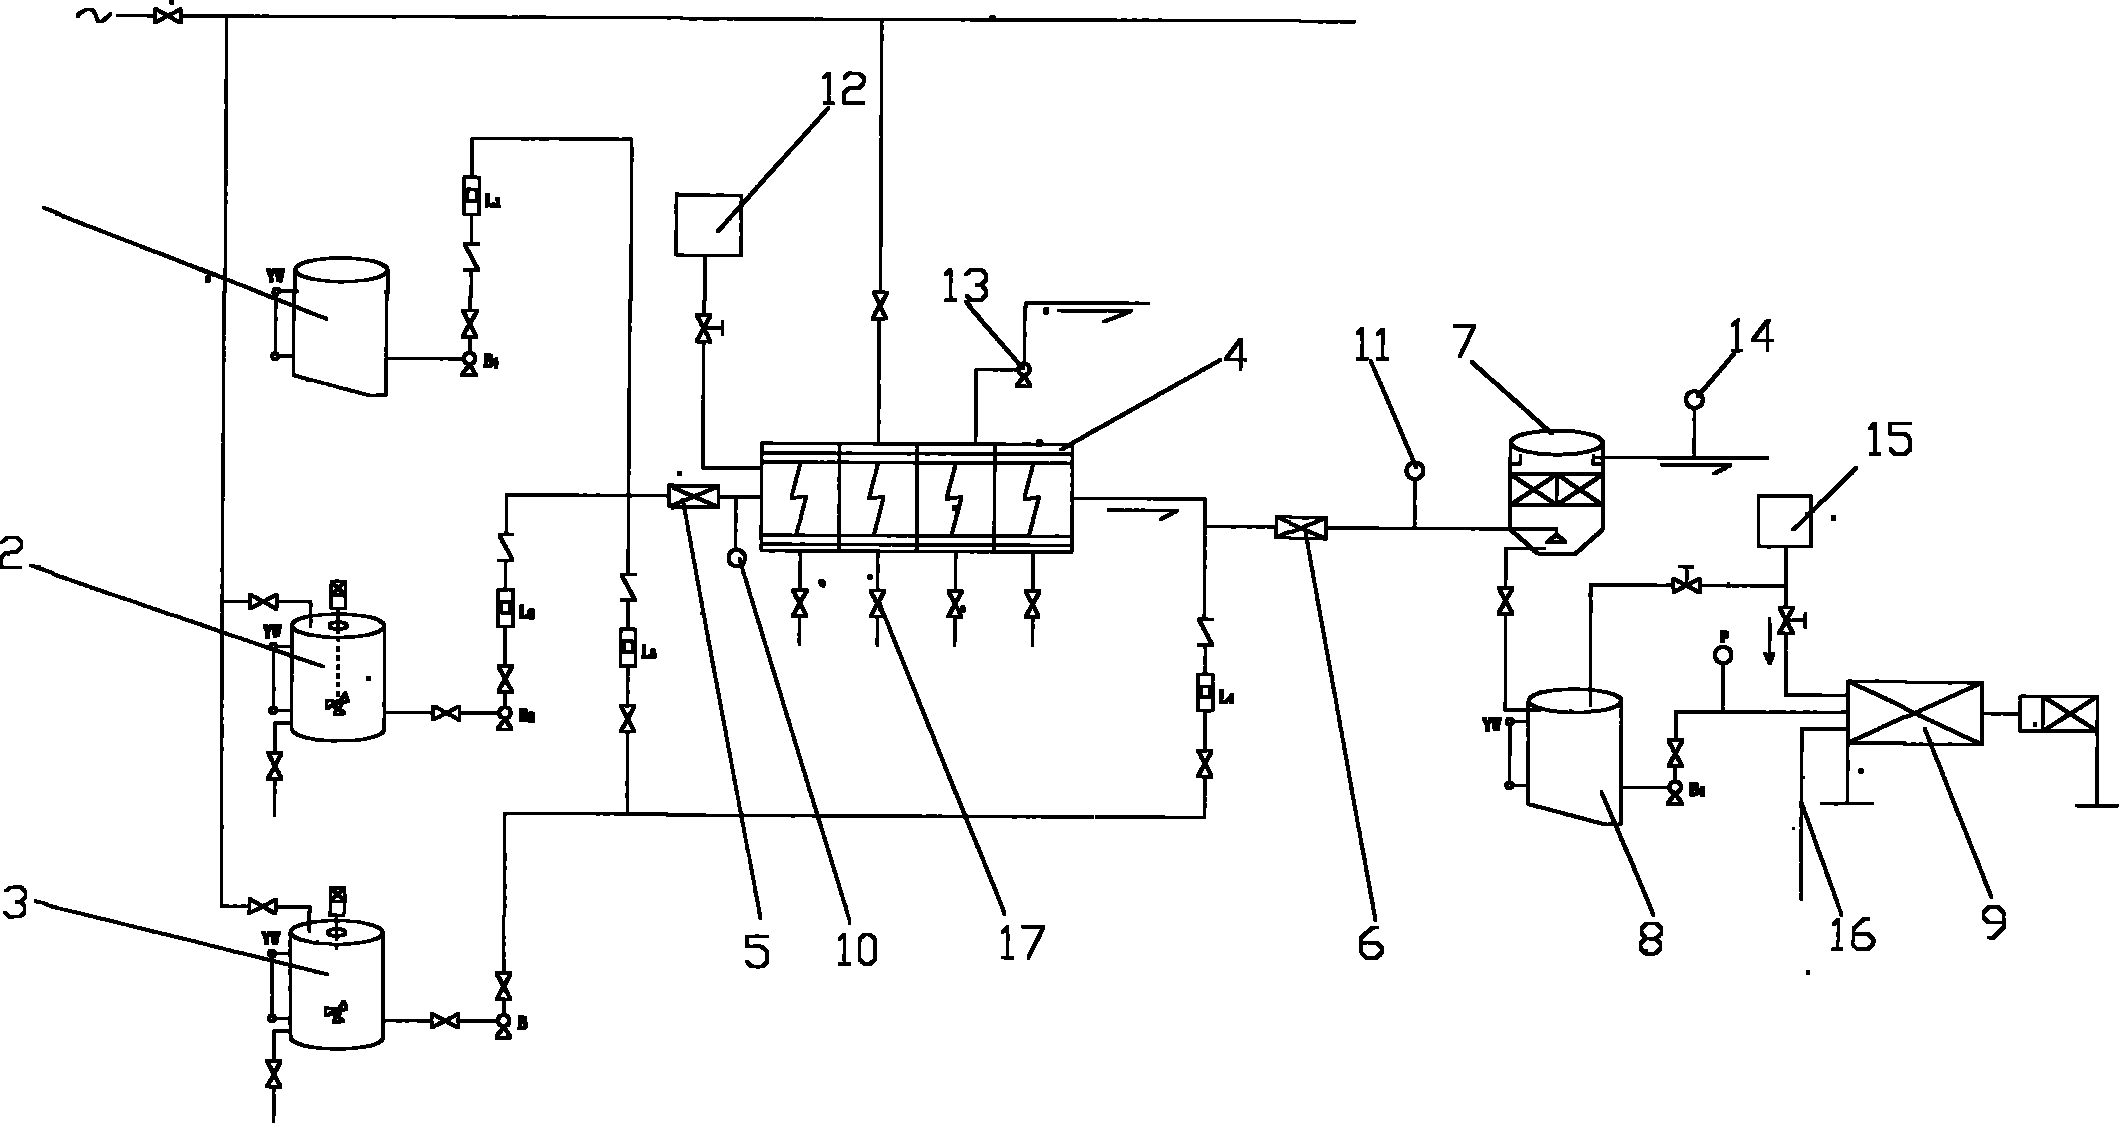 Wastewater electrolytic treatment system